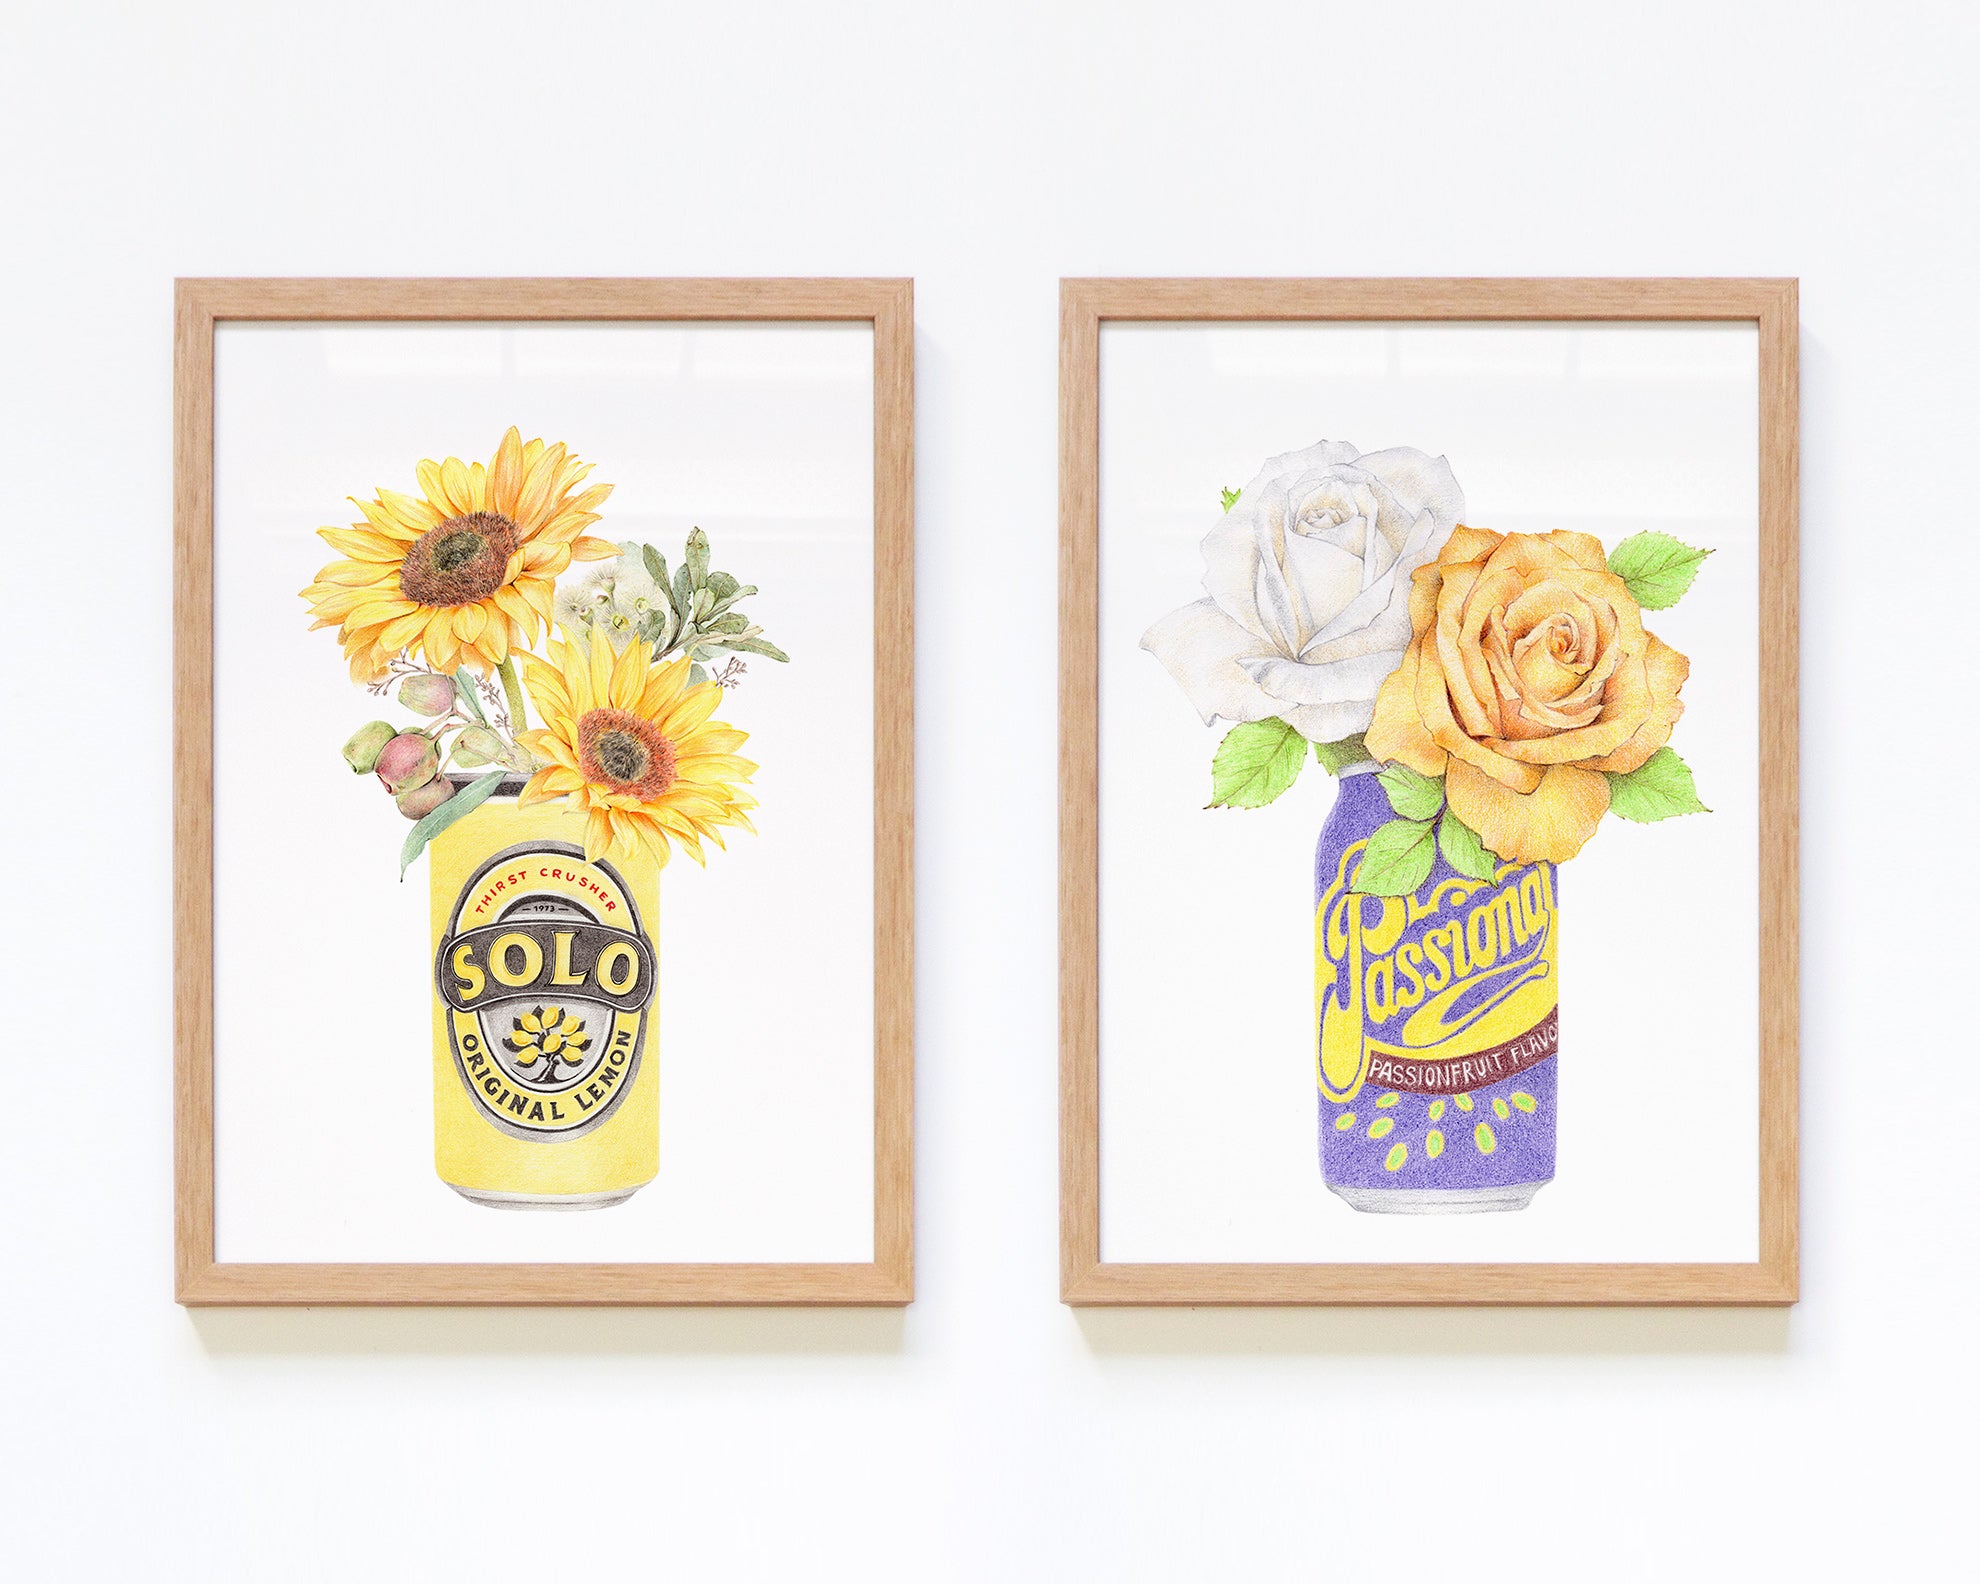 Framed Botanical Art Set with sunflowers and roses